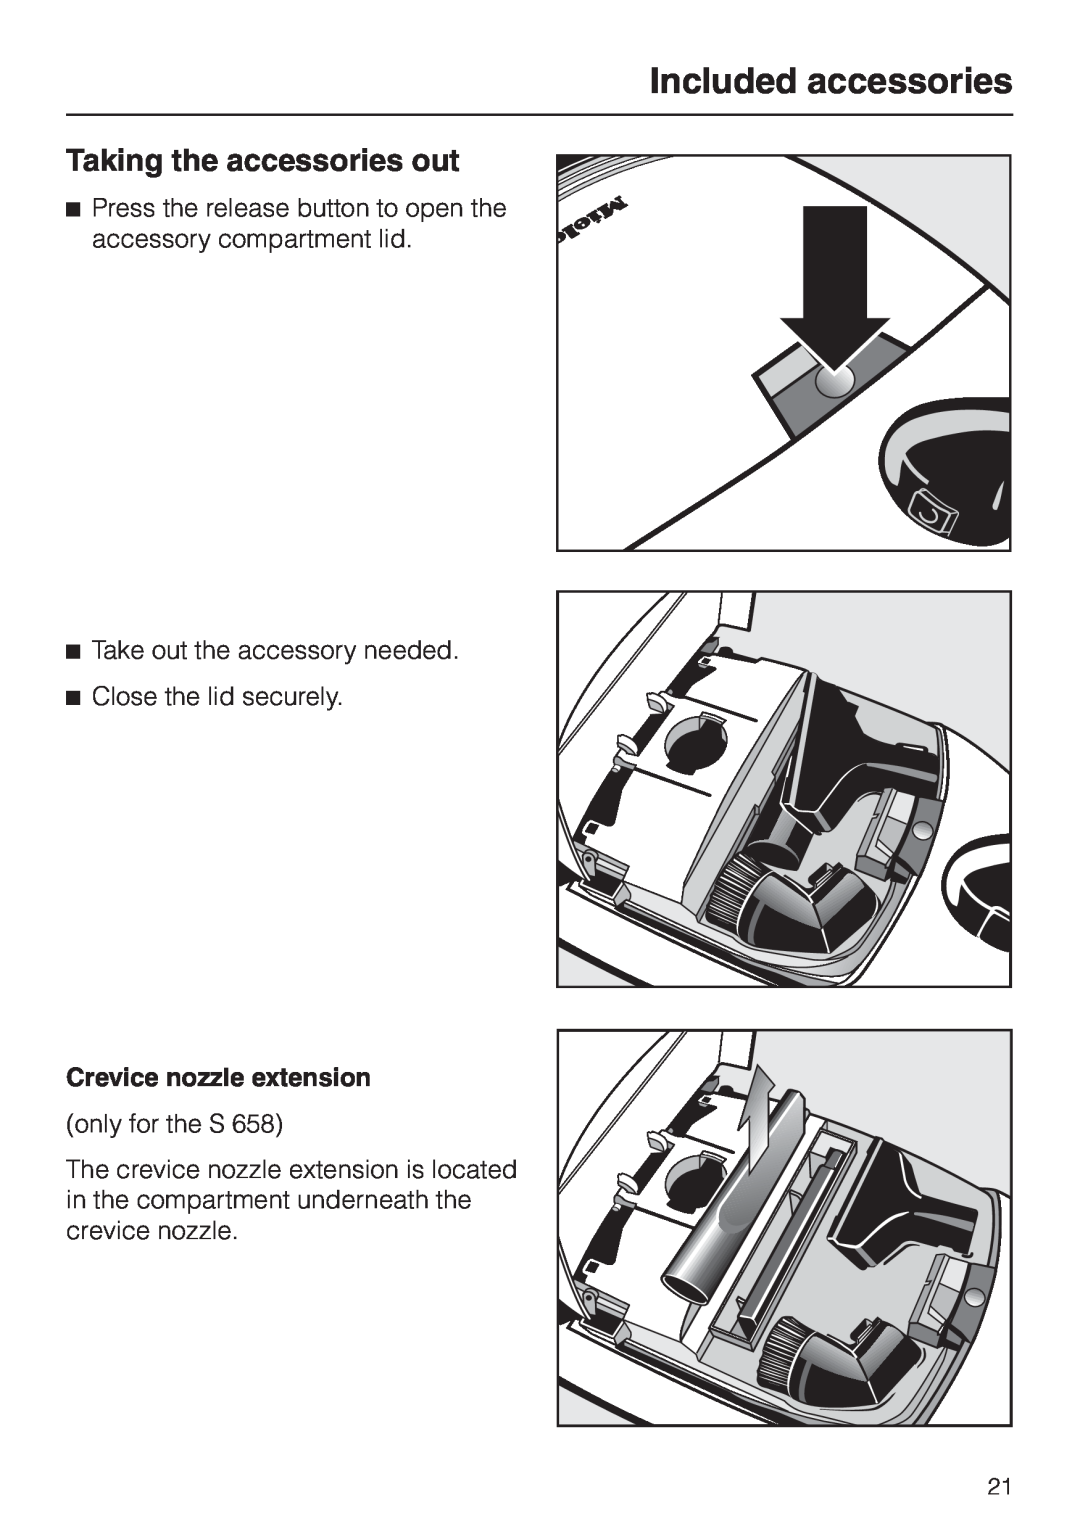 Miele S 558 manual Taking the accessories out, Included accessories, Crevice nozzle extension 